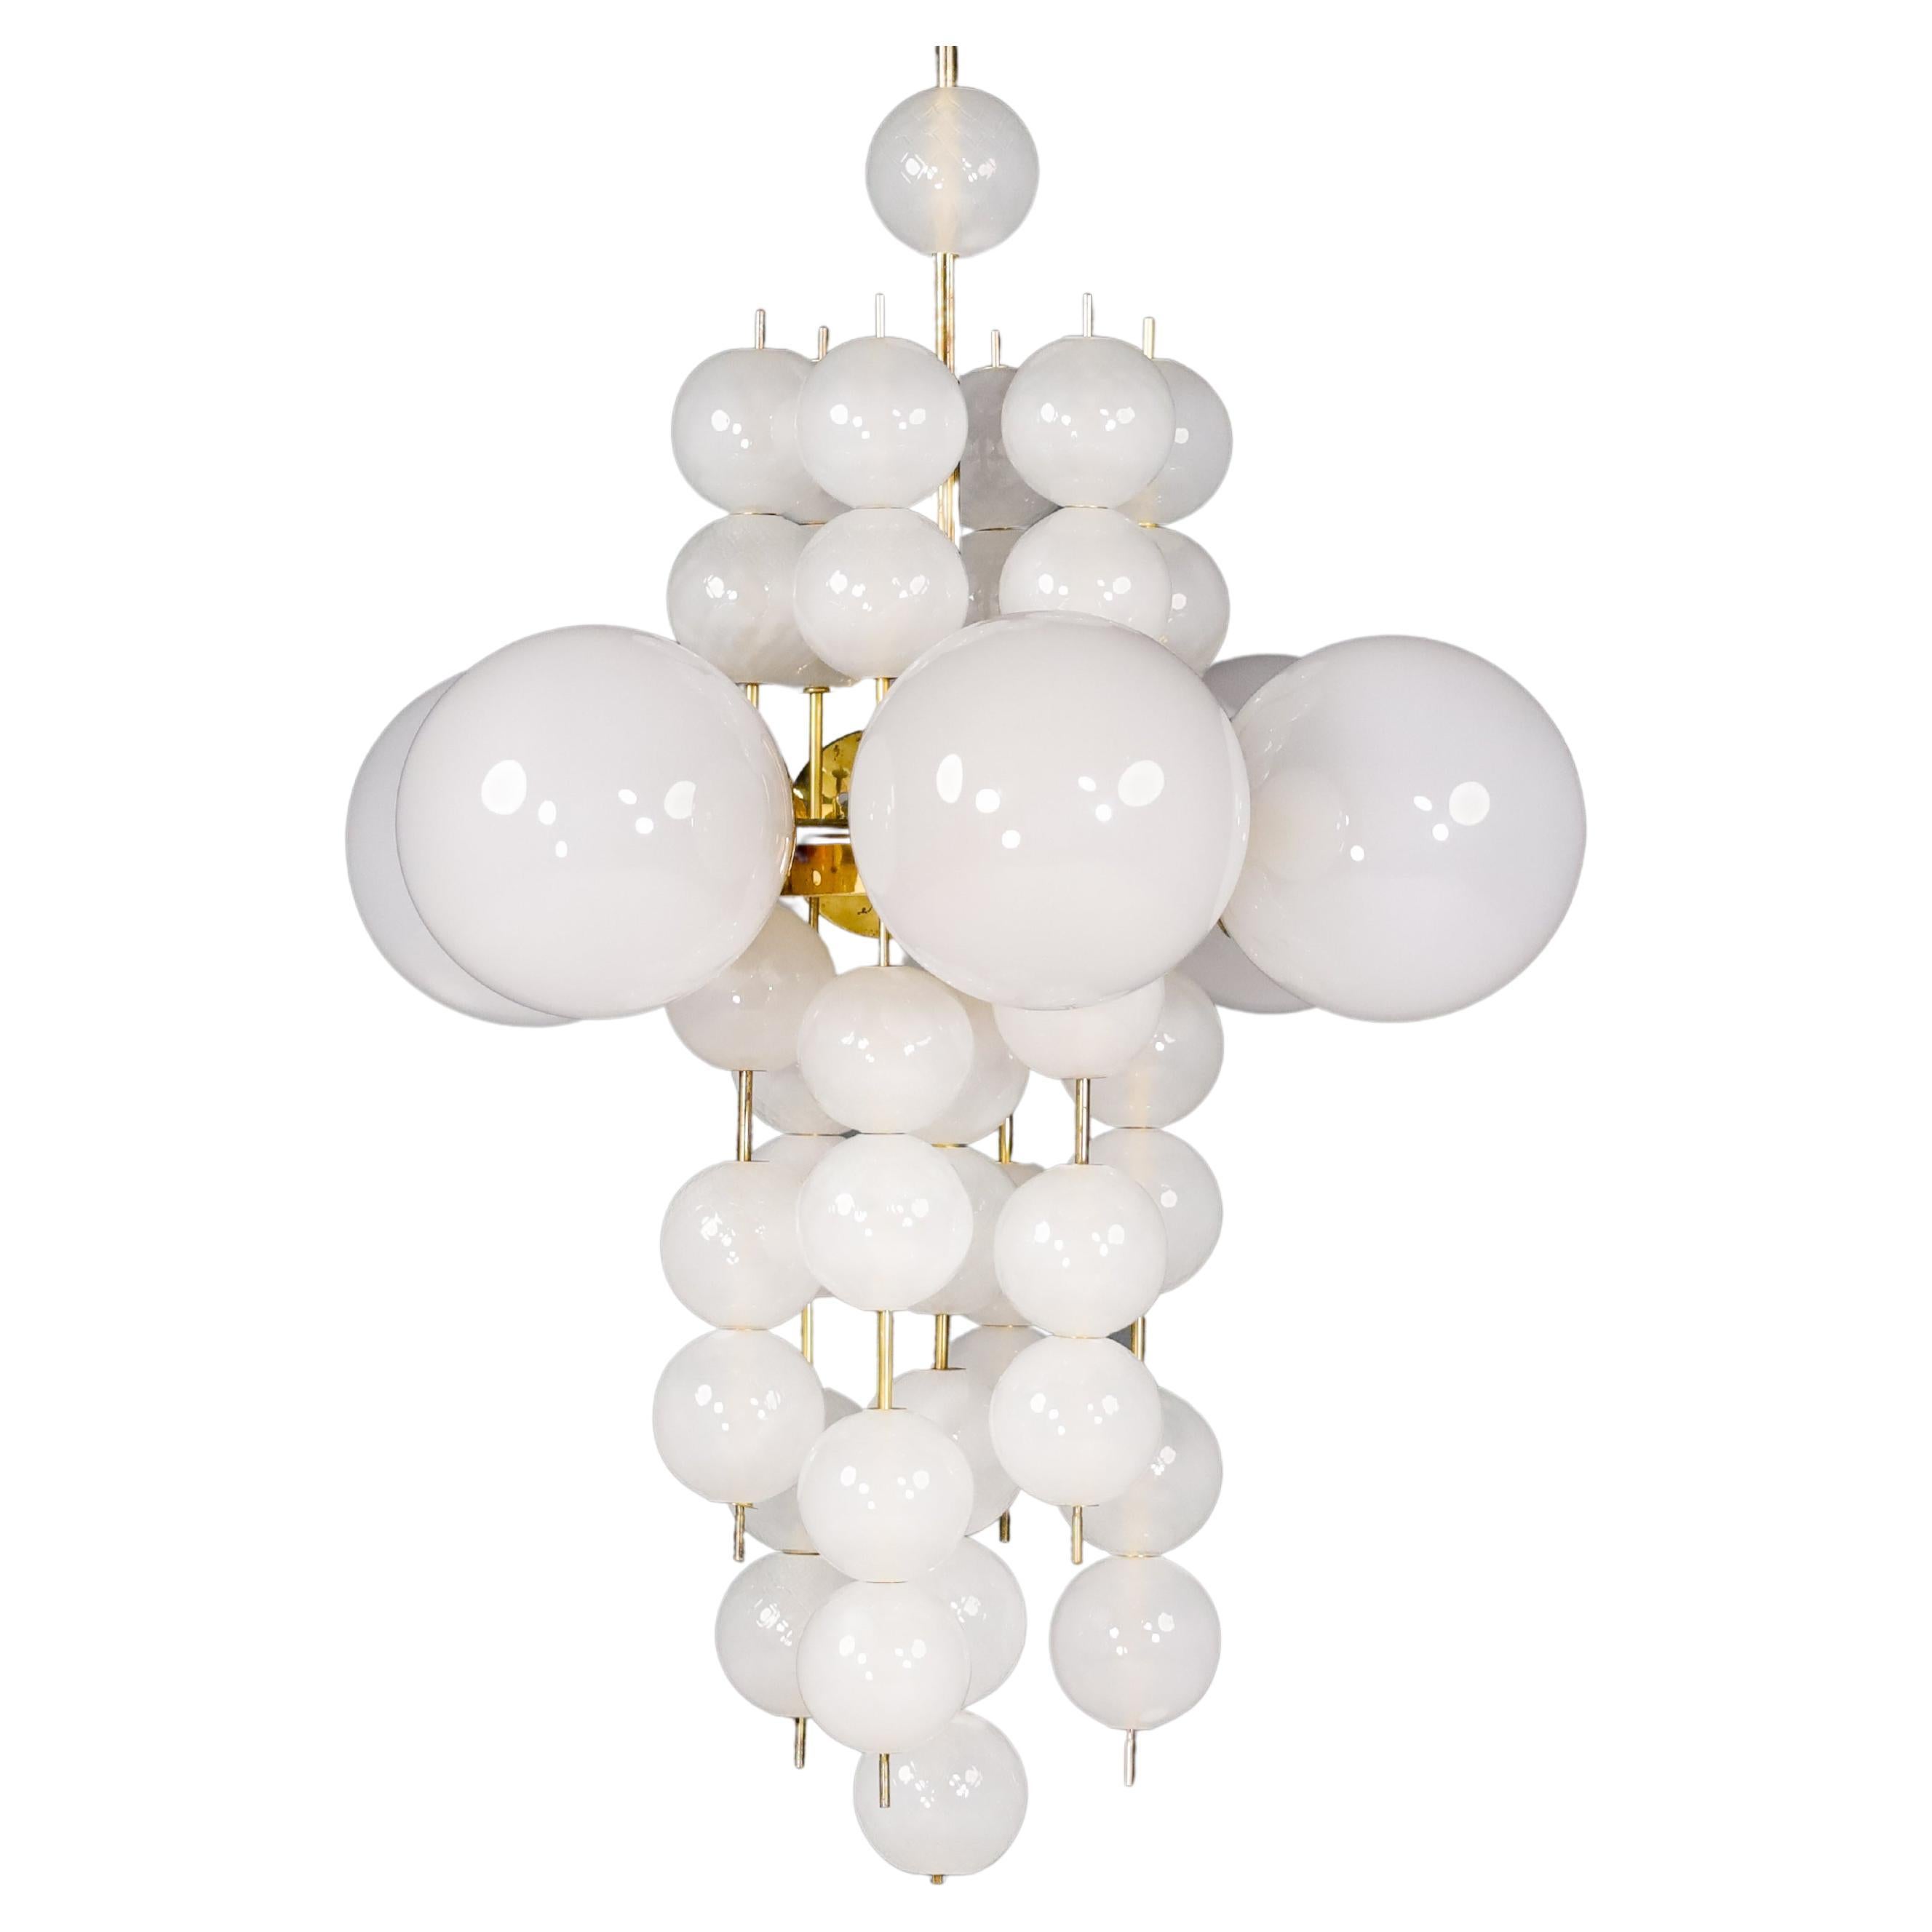 XL Hotel Chandelier with Brass Fixture and Hand-Blowed Frosted Glass Globes For Sale